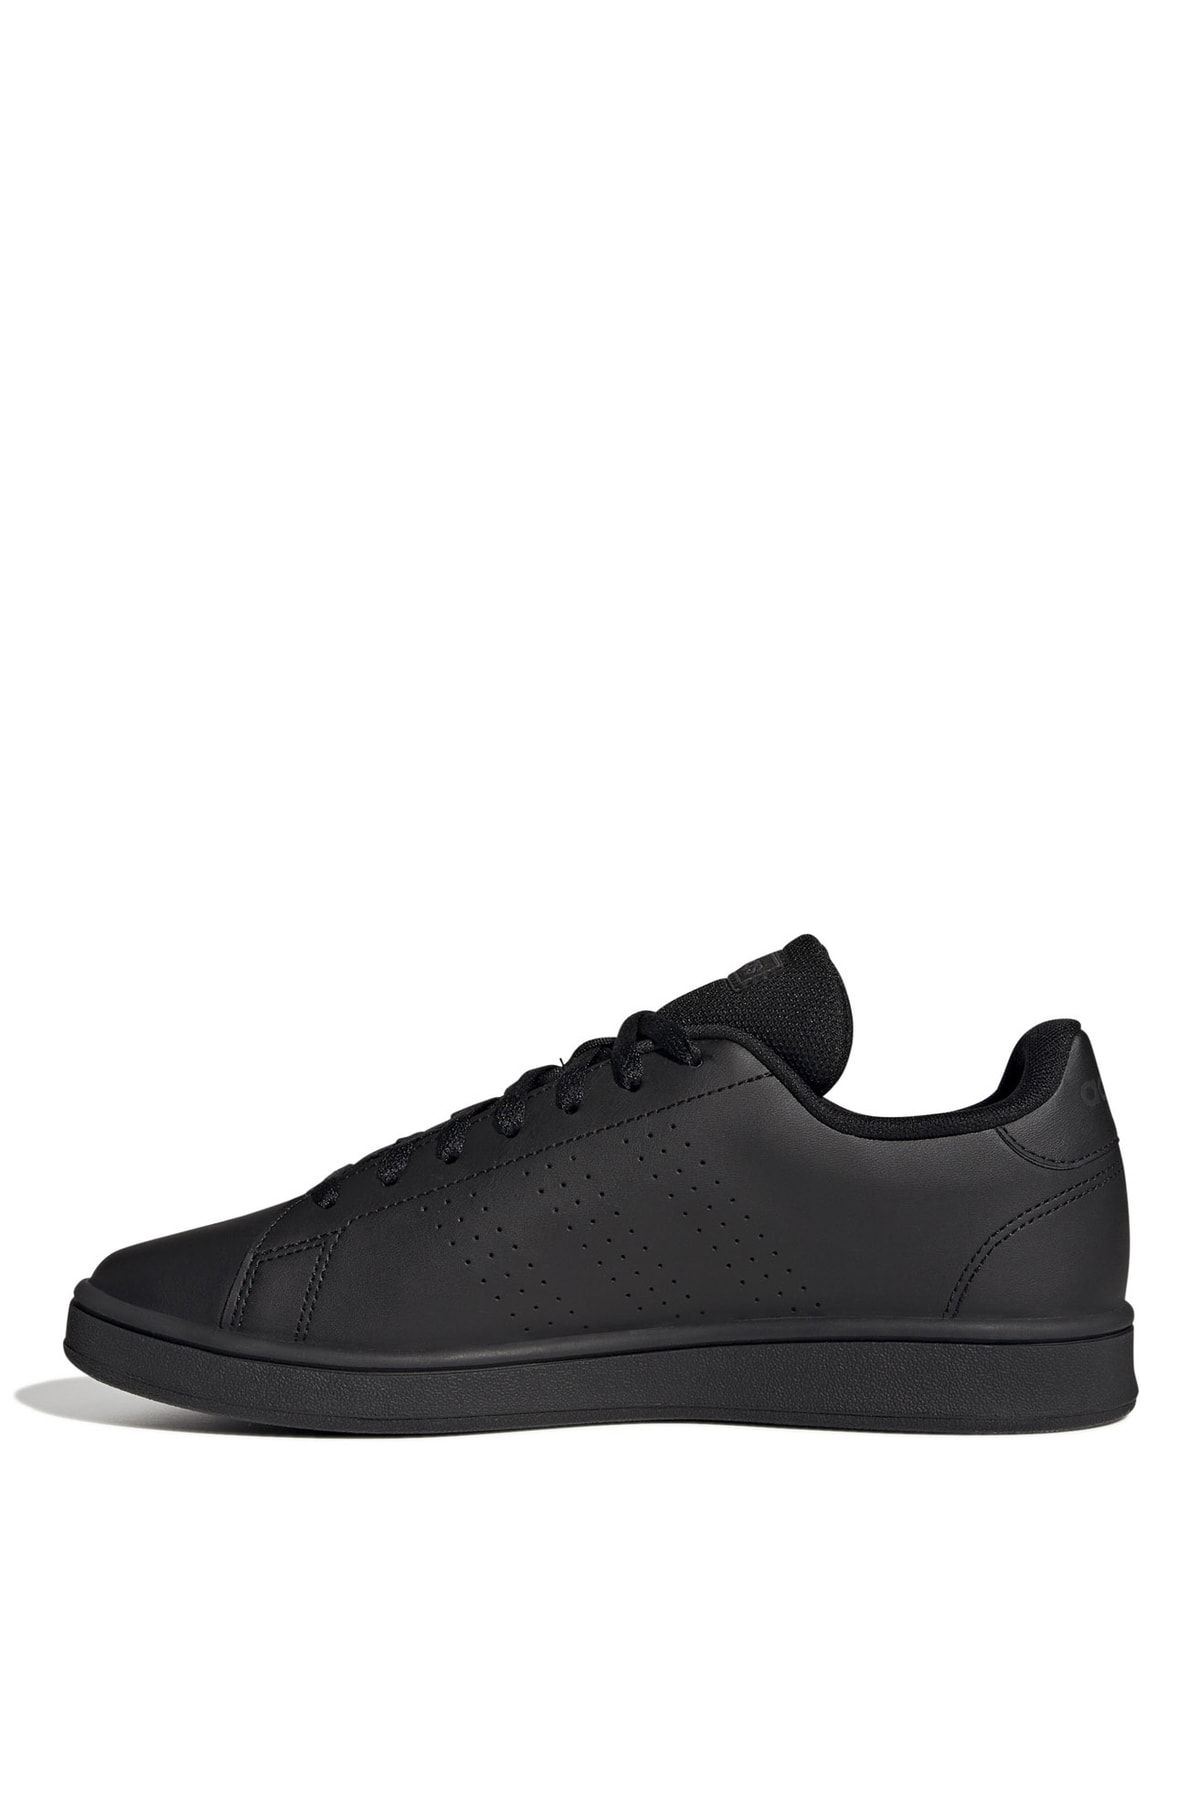 Shoes - Advantage Lifestyle Court Two Hook-and-Loop Shoes - Black | adidas  South Africa